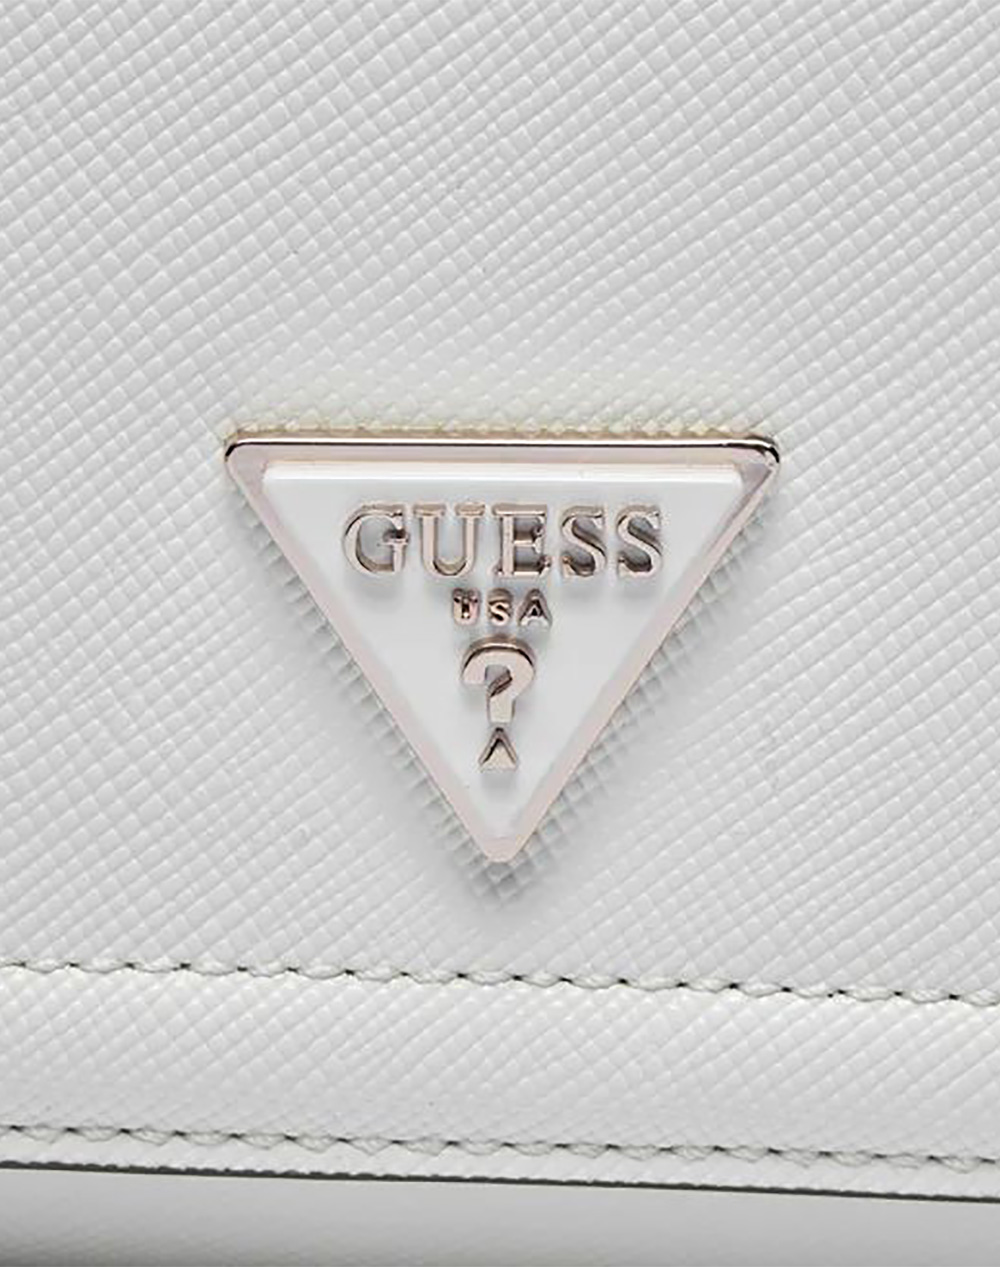 GUESS NOELLE CONVERTIBLE XBODY FLAP ΤΣΑΝΤΑ ΓΥΝΑΙΚΕΙΟ (Διαστάσεις: 24 x 15 x 7 εκ)